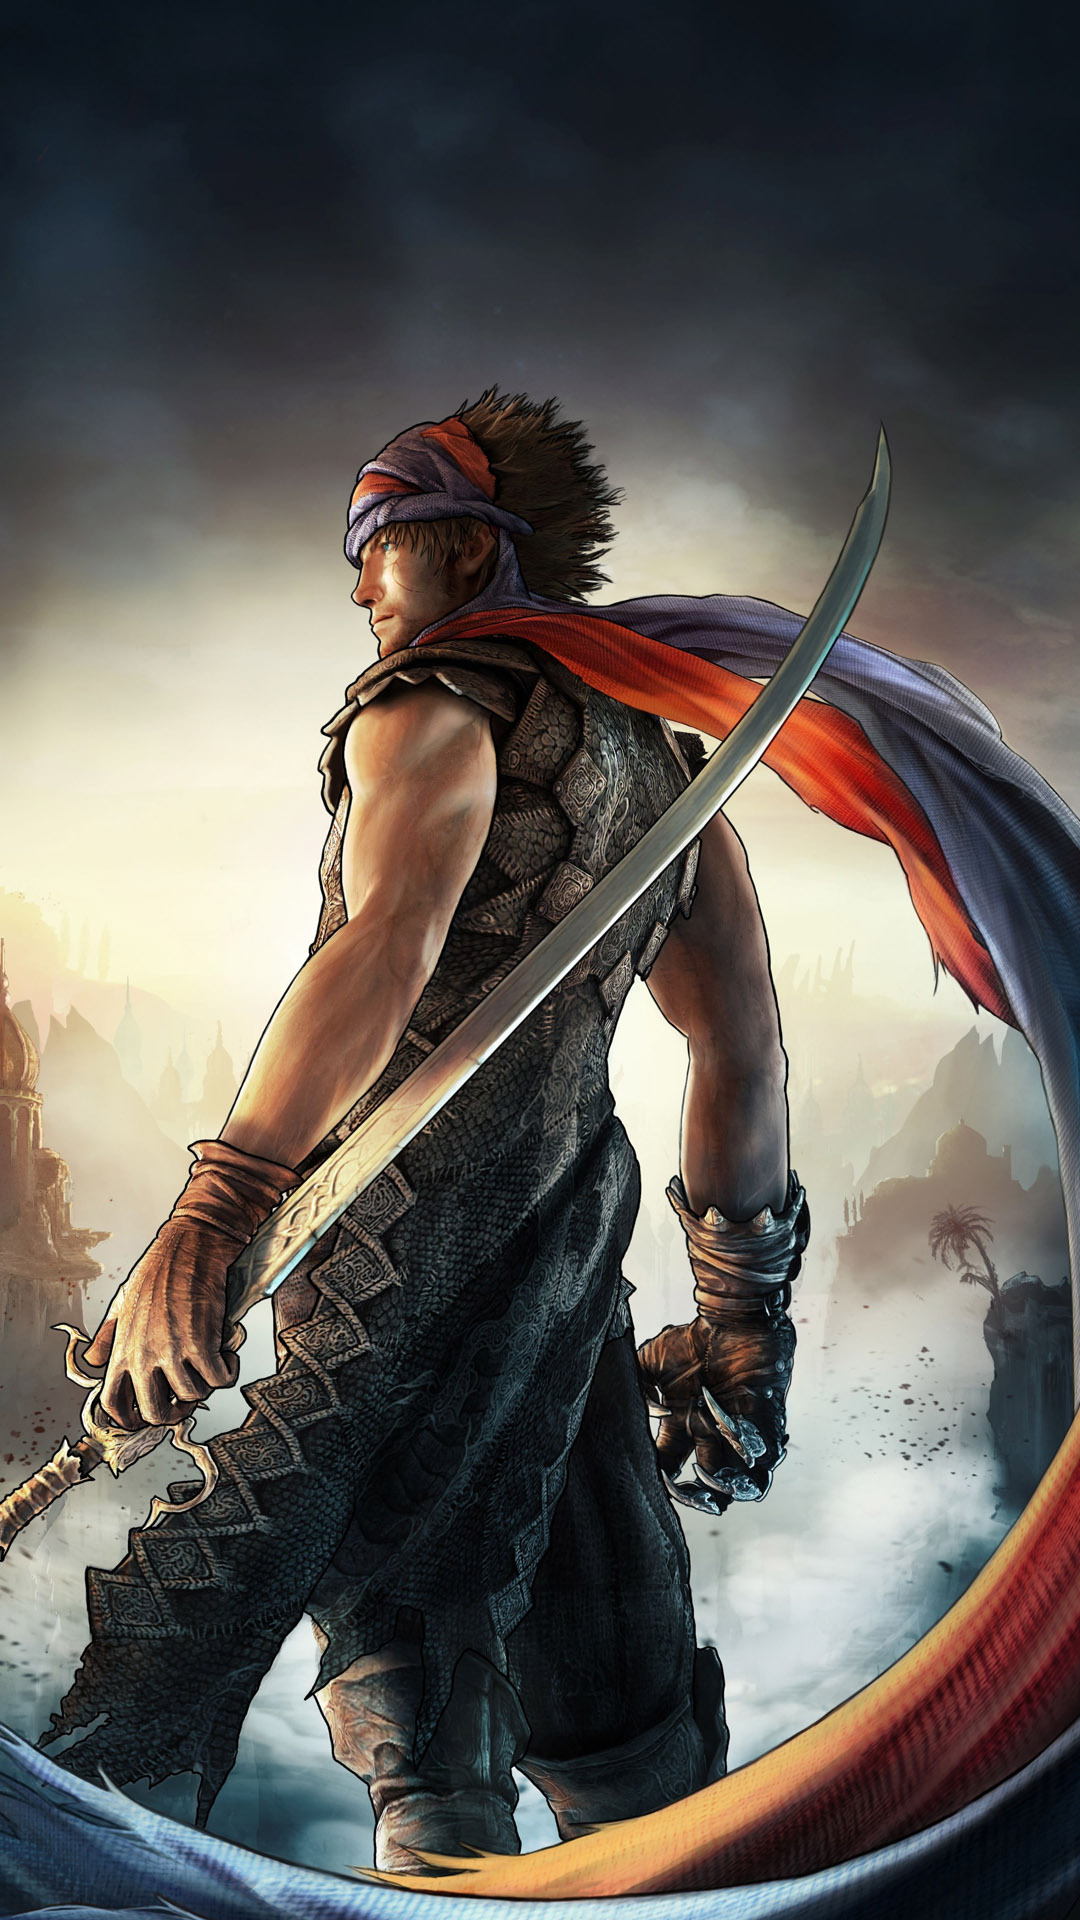 Prince of persia 5 mobile game free download